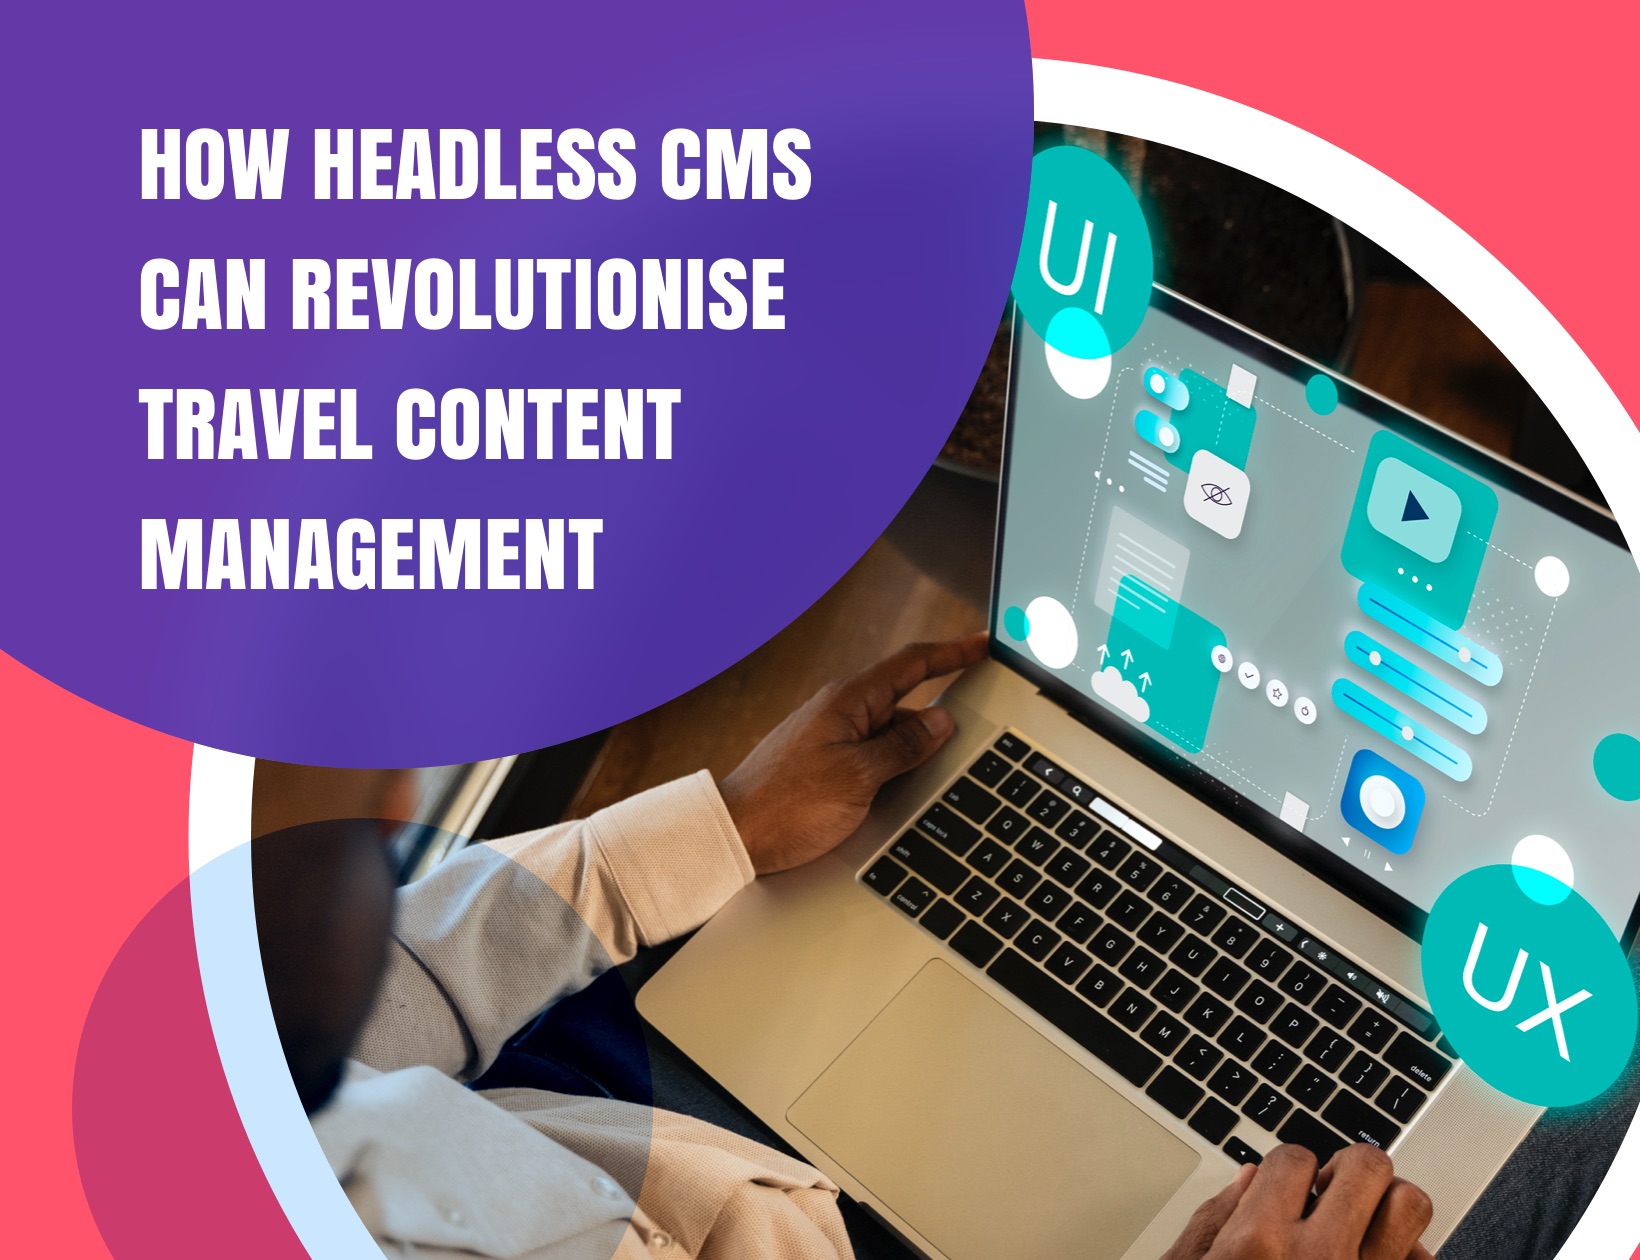 How Headless CMS Can Revolutionise Travel Content Management